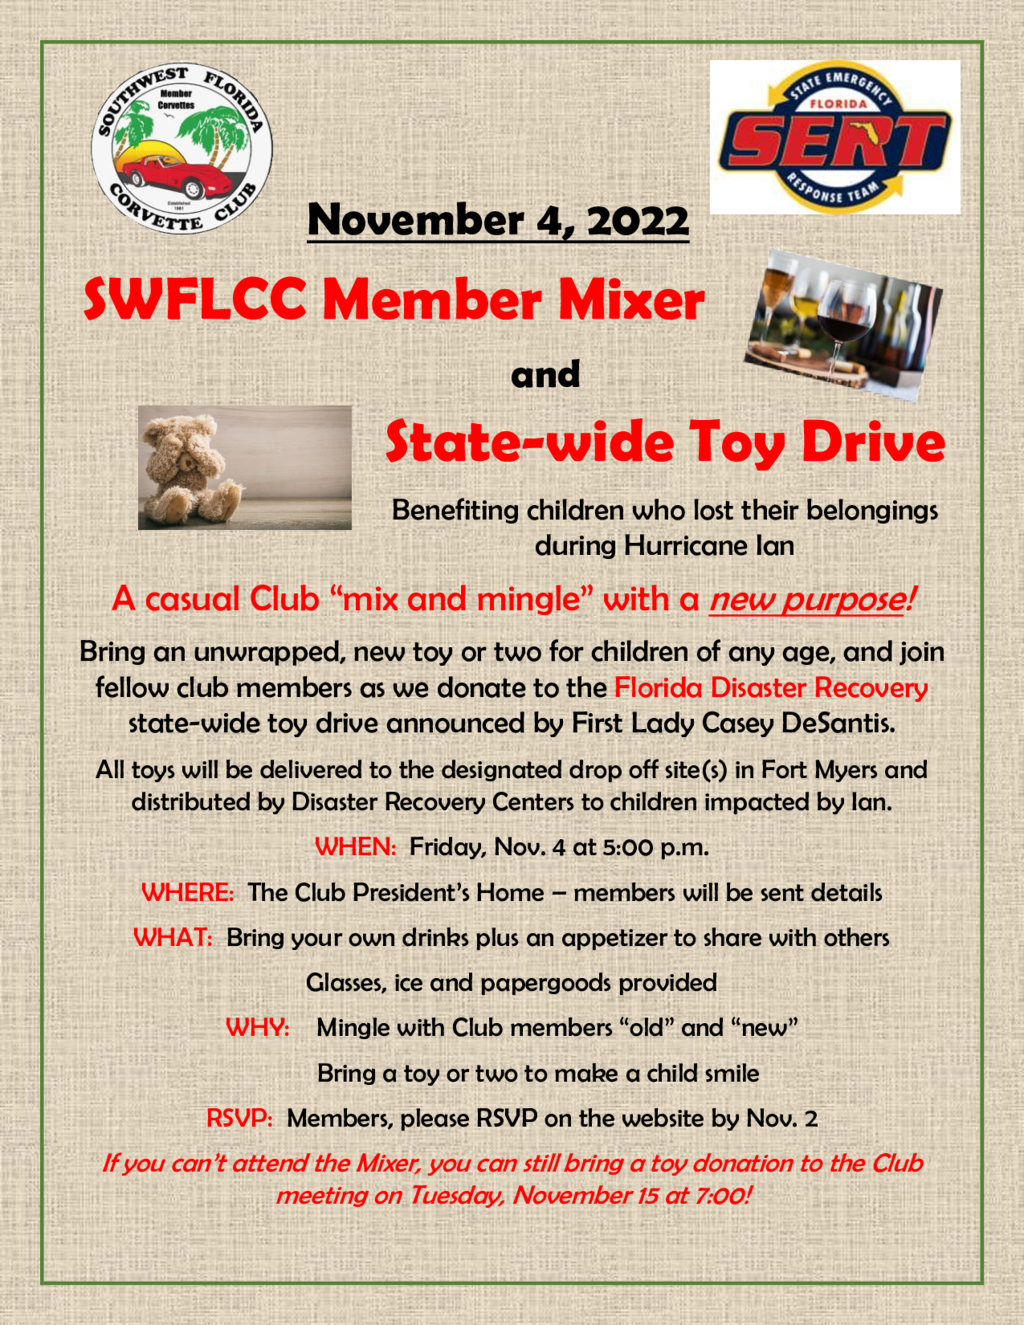 SWFLCC Mixer and Toy Drive